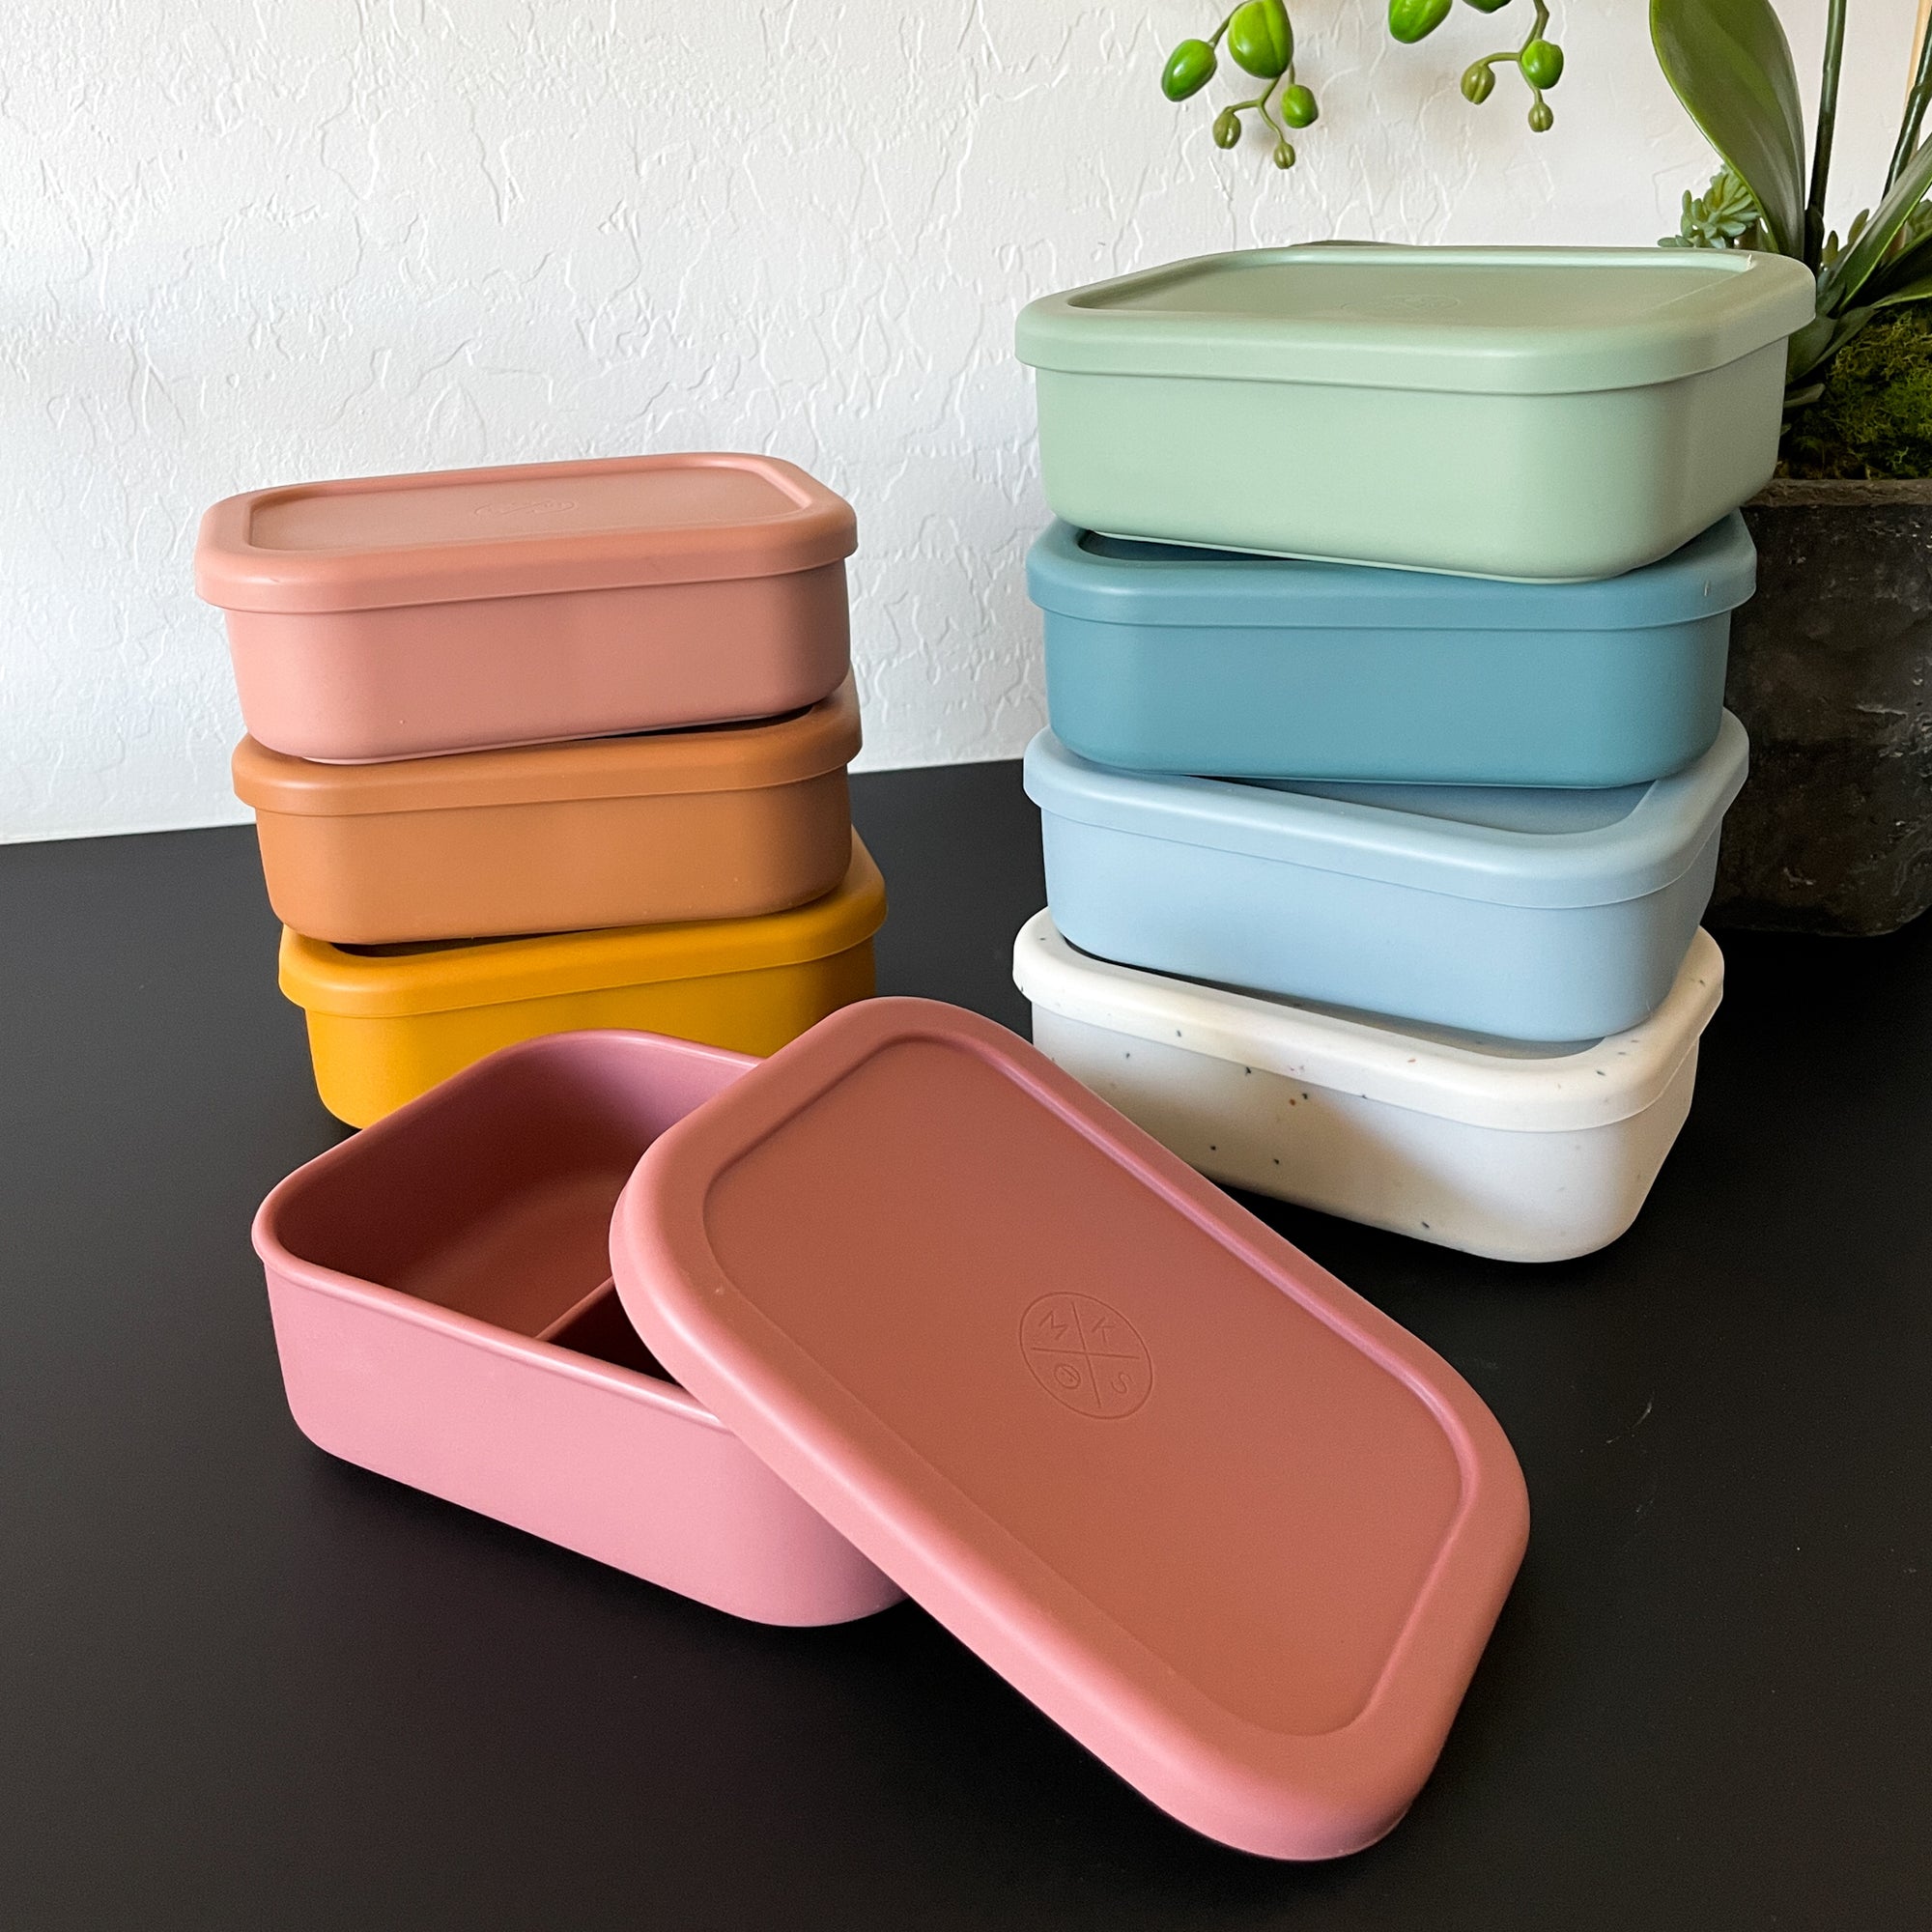 Bento lunch dinnerware silicone for kids and adults on the go outdoor safe unbreakable mks miminoo arizona usa 